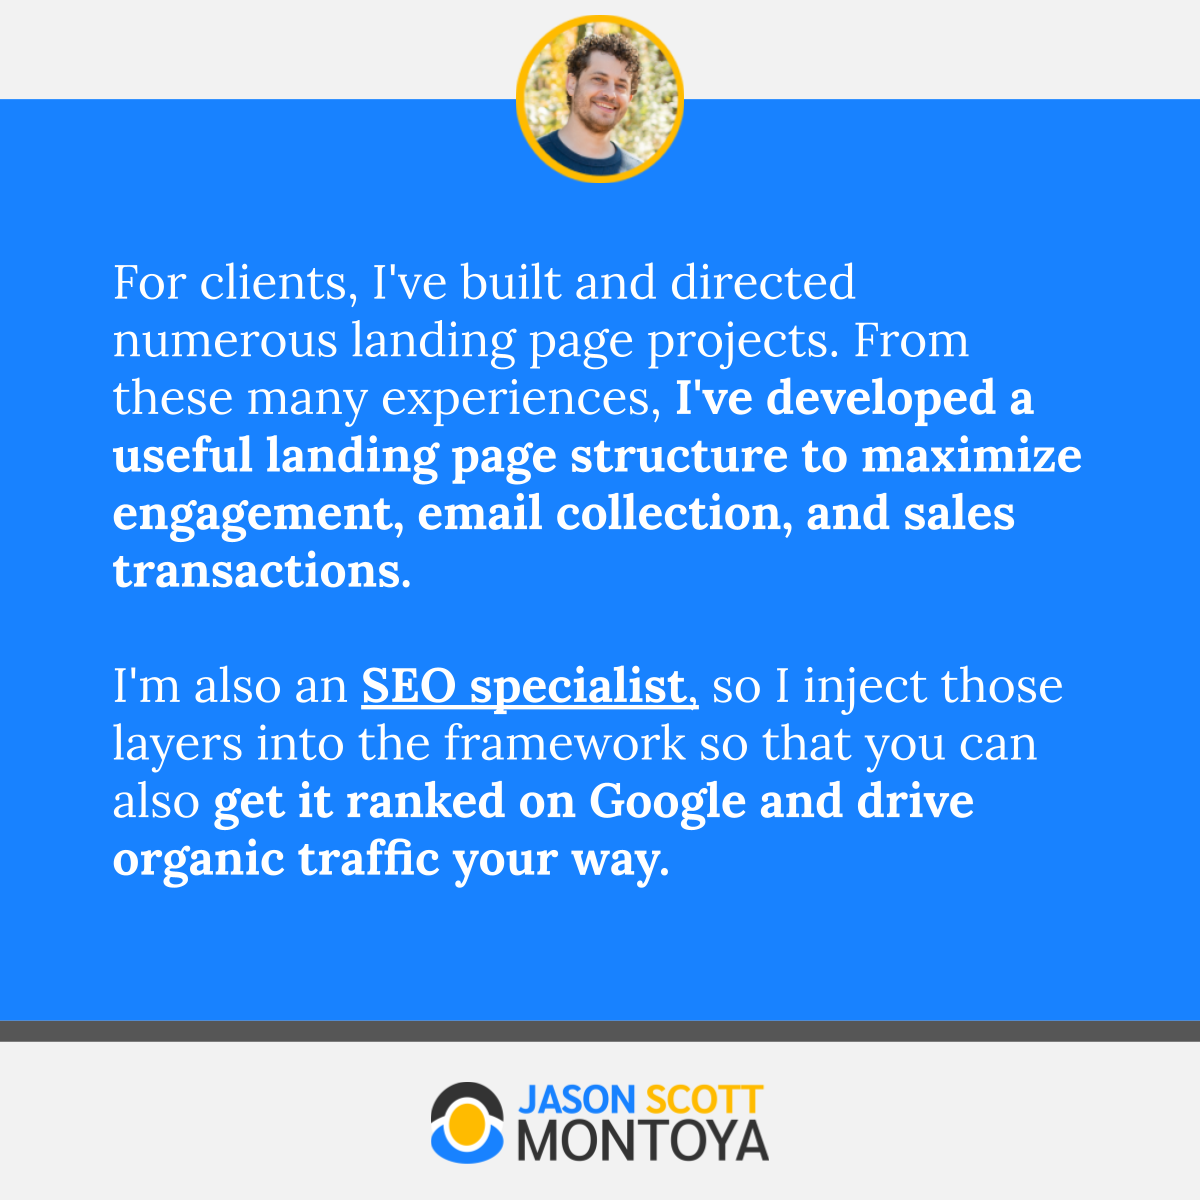 For clients, I've built and directed numerous landing page projects. From these many experiences, I've developed a useful landing page structure to maximize engagement, email collection, and sales transactions.   I'm also an SEO specialist, so I inject those layers into the framework so that you can also get it ranked on Google and drive organic traffic your way.